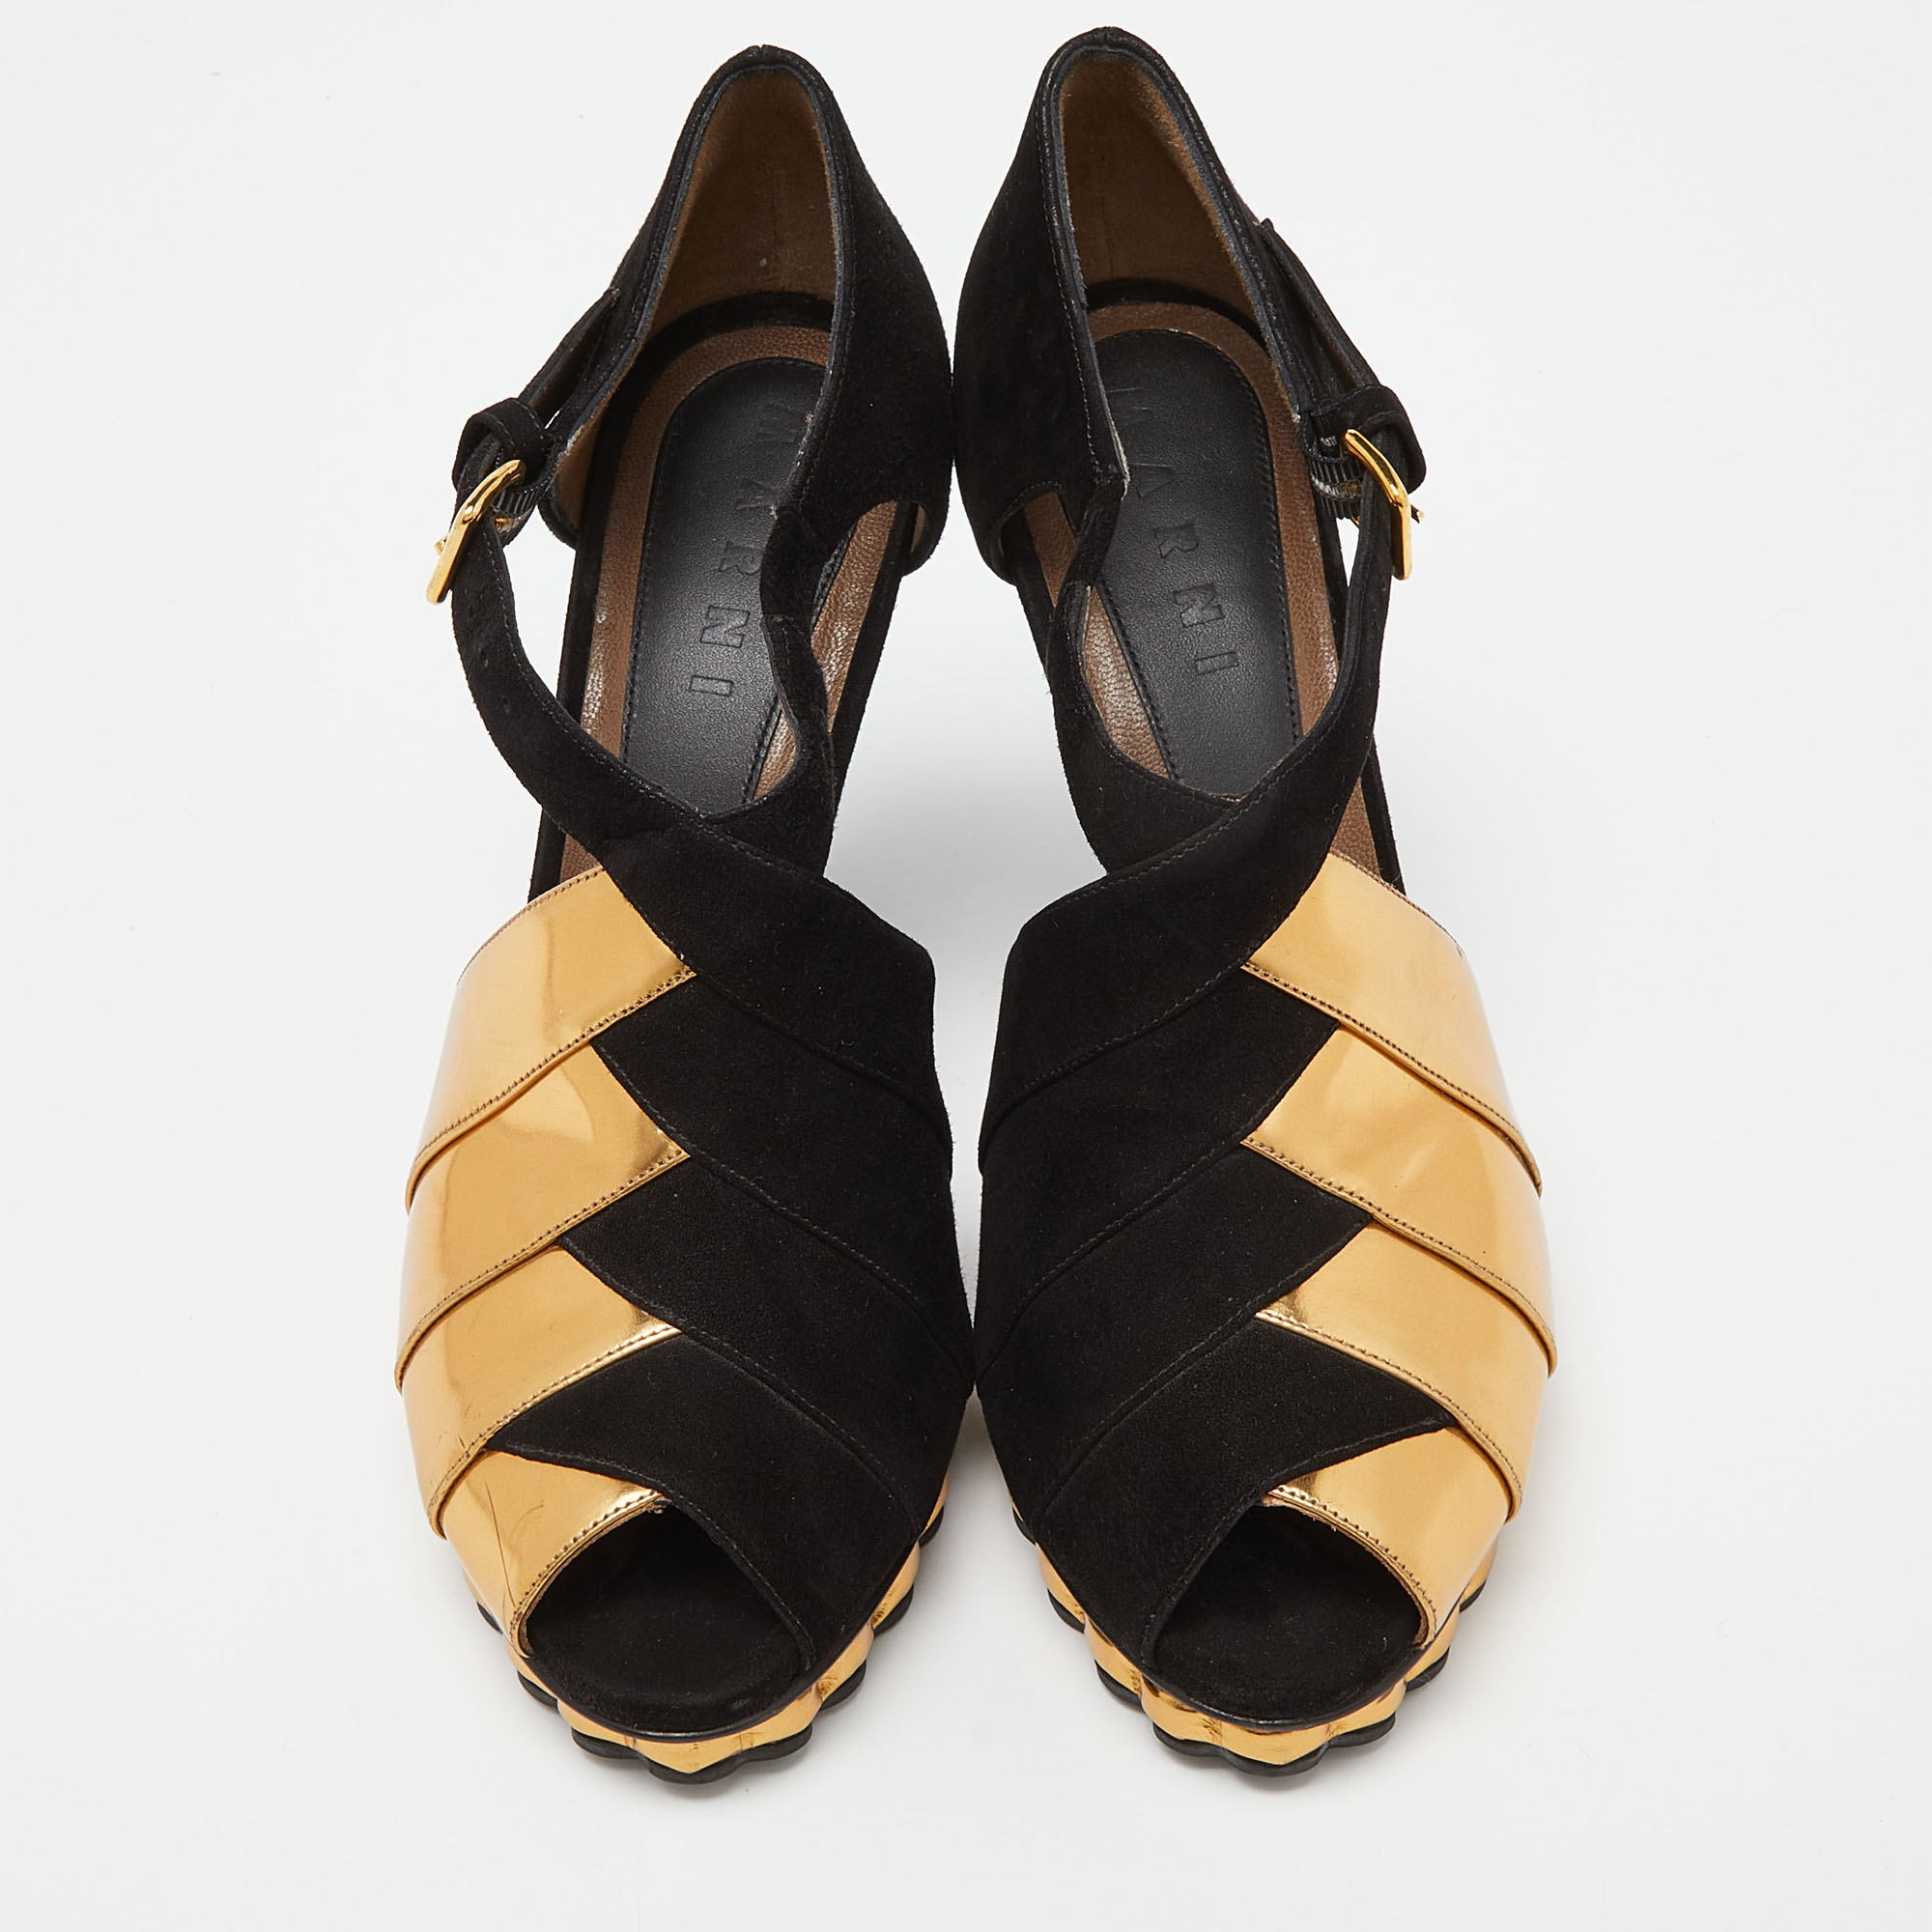 Marni Black/Gold Suede And Leather Peep Toe Platform Sandals Size 40.5